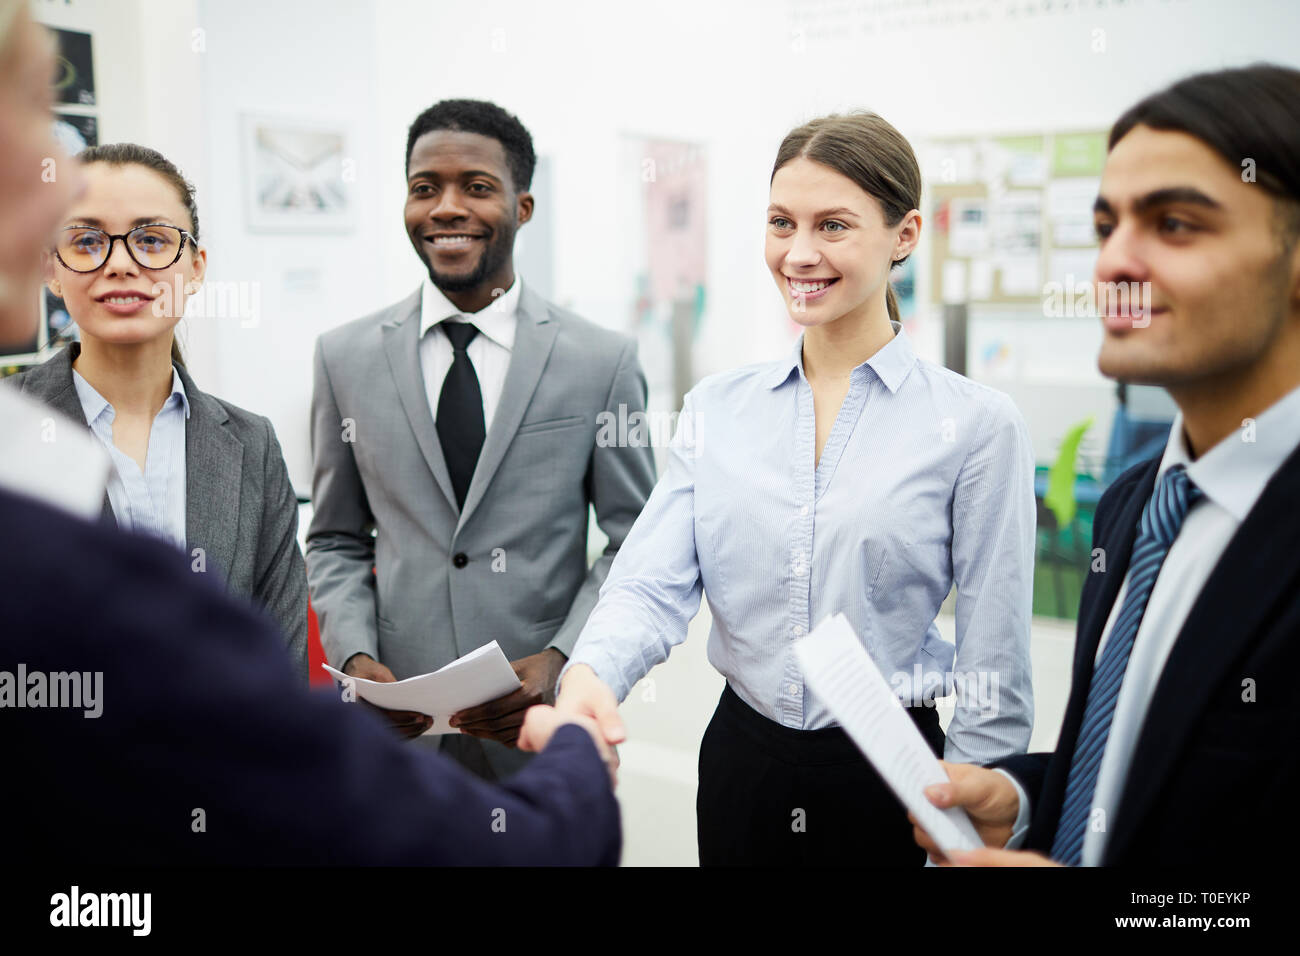 Business partners Shaking Hands Stock Photo